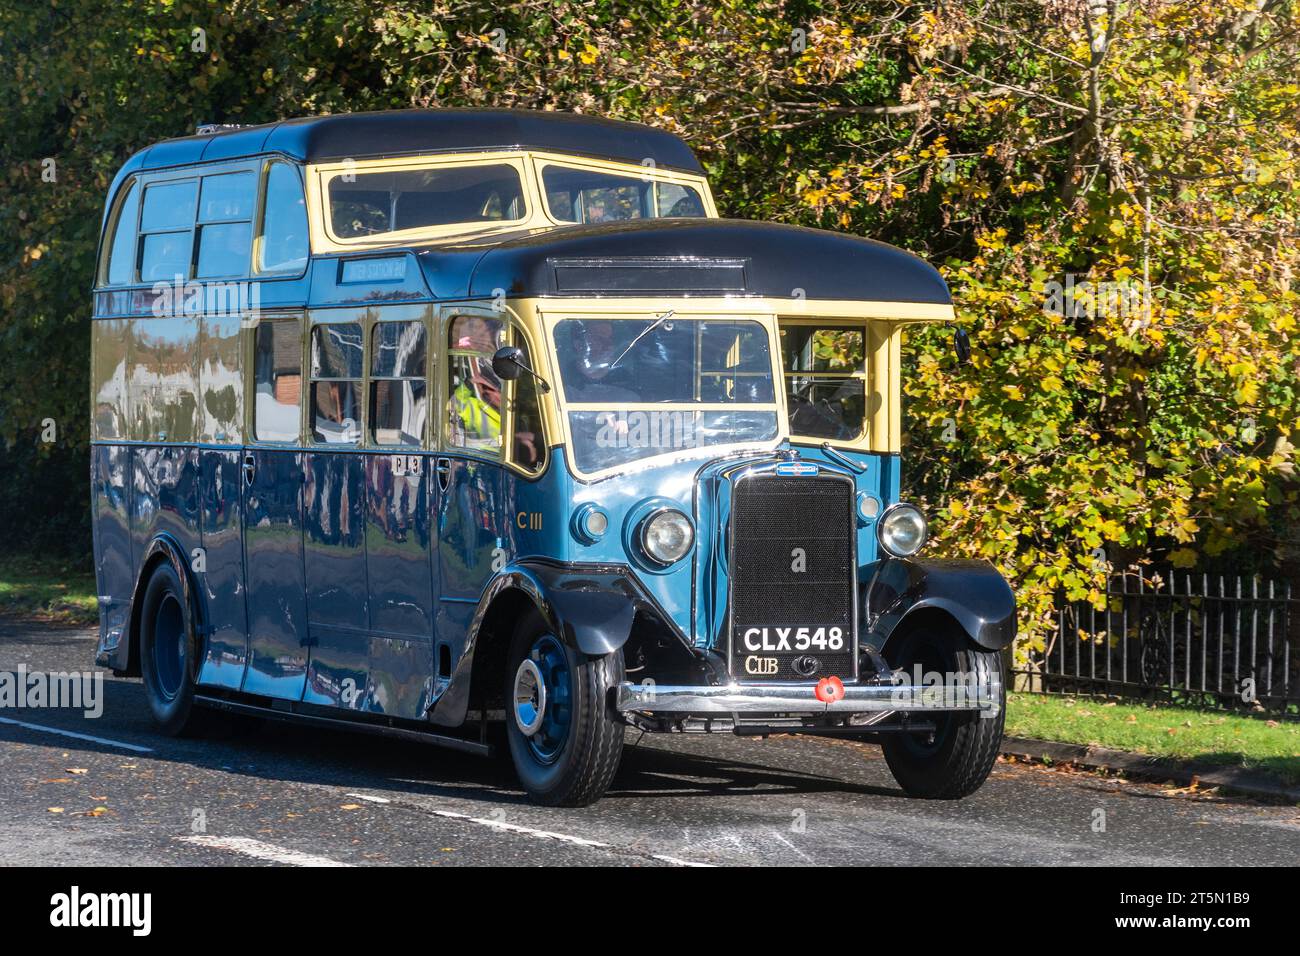 5th November 2023. Participants in the London to Brighton Veteran Car Run 2023 driving through West Sussex, England, UK. An old Leyland Cub SKPZ2 bus dating from 1936 following the route. Stock Photo